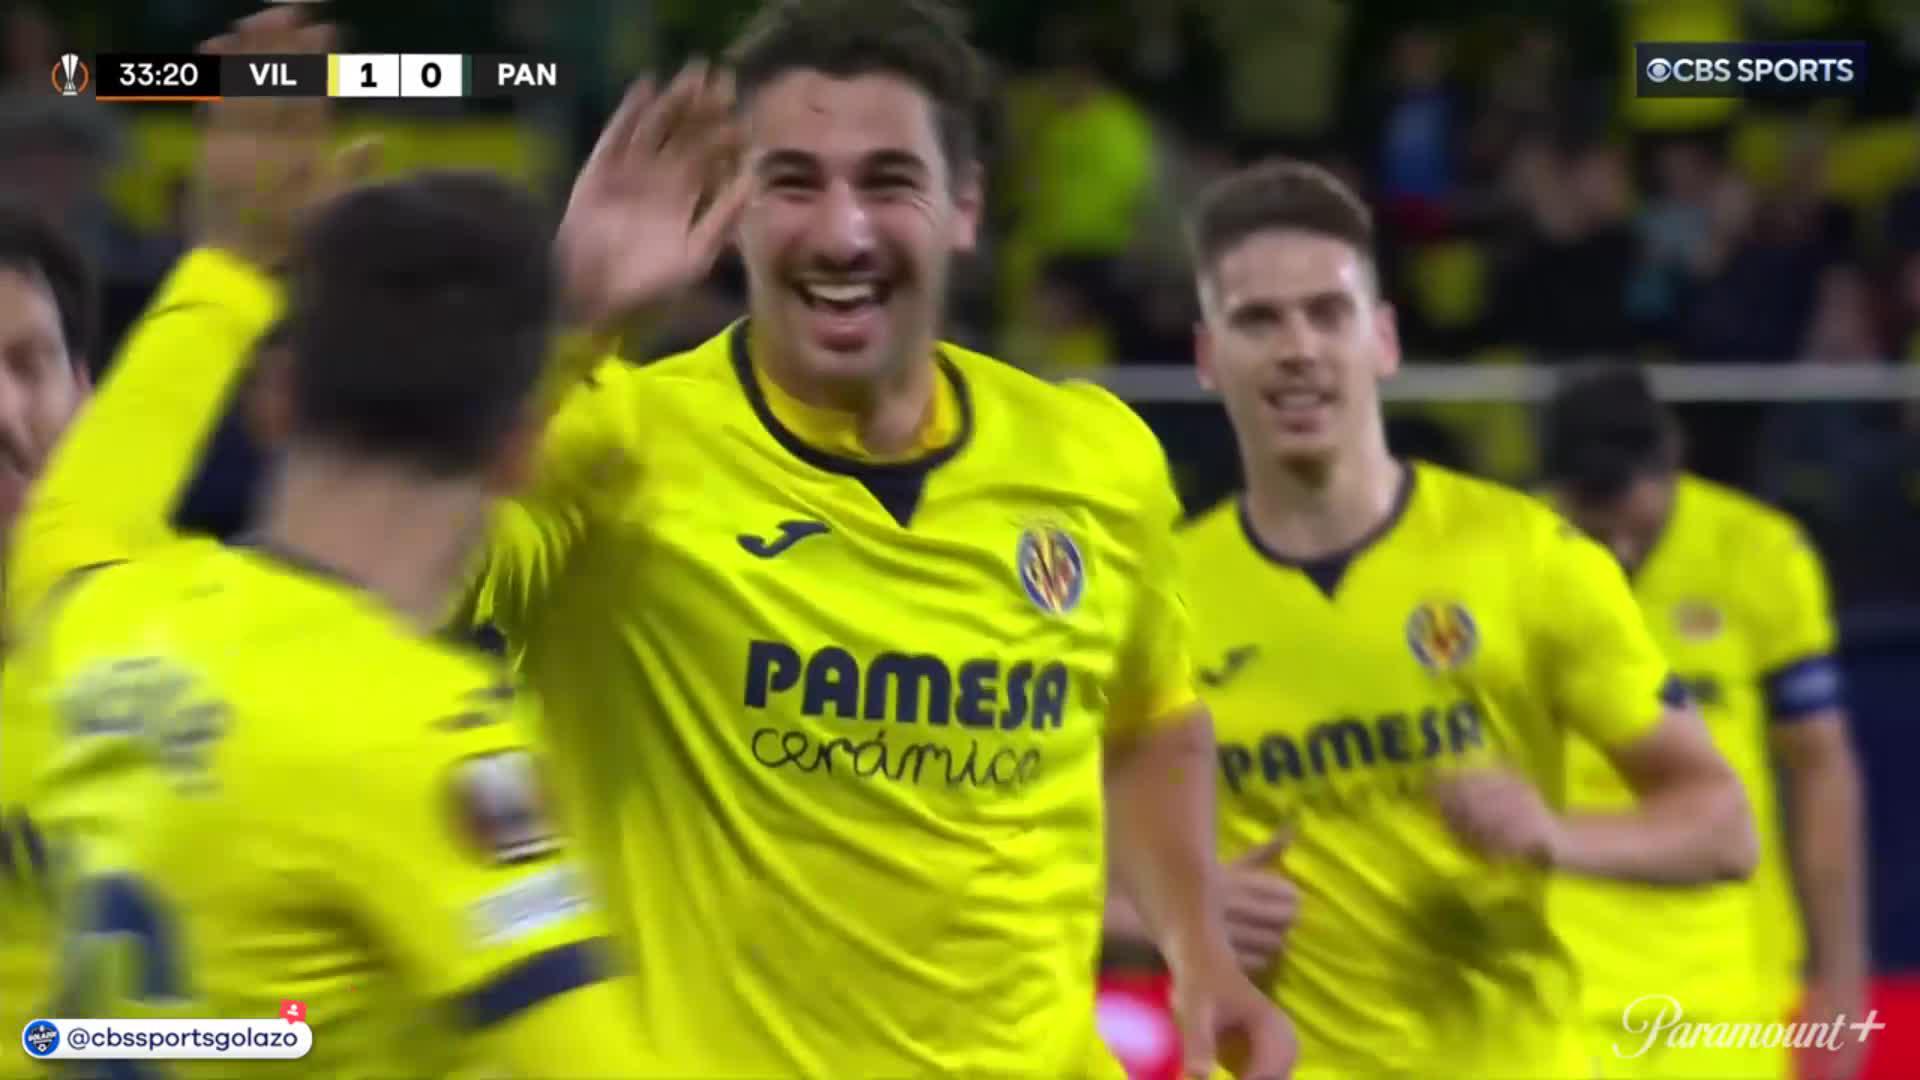 What a way for Santi Comesaña to score his first Villarreal goal. 🤩